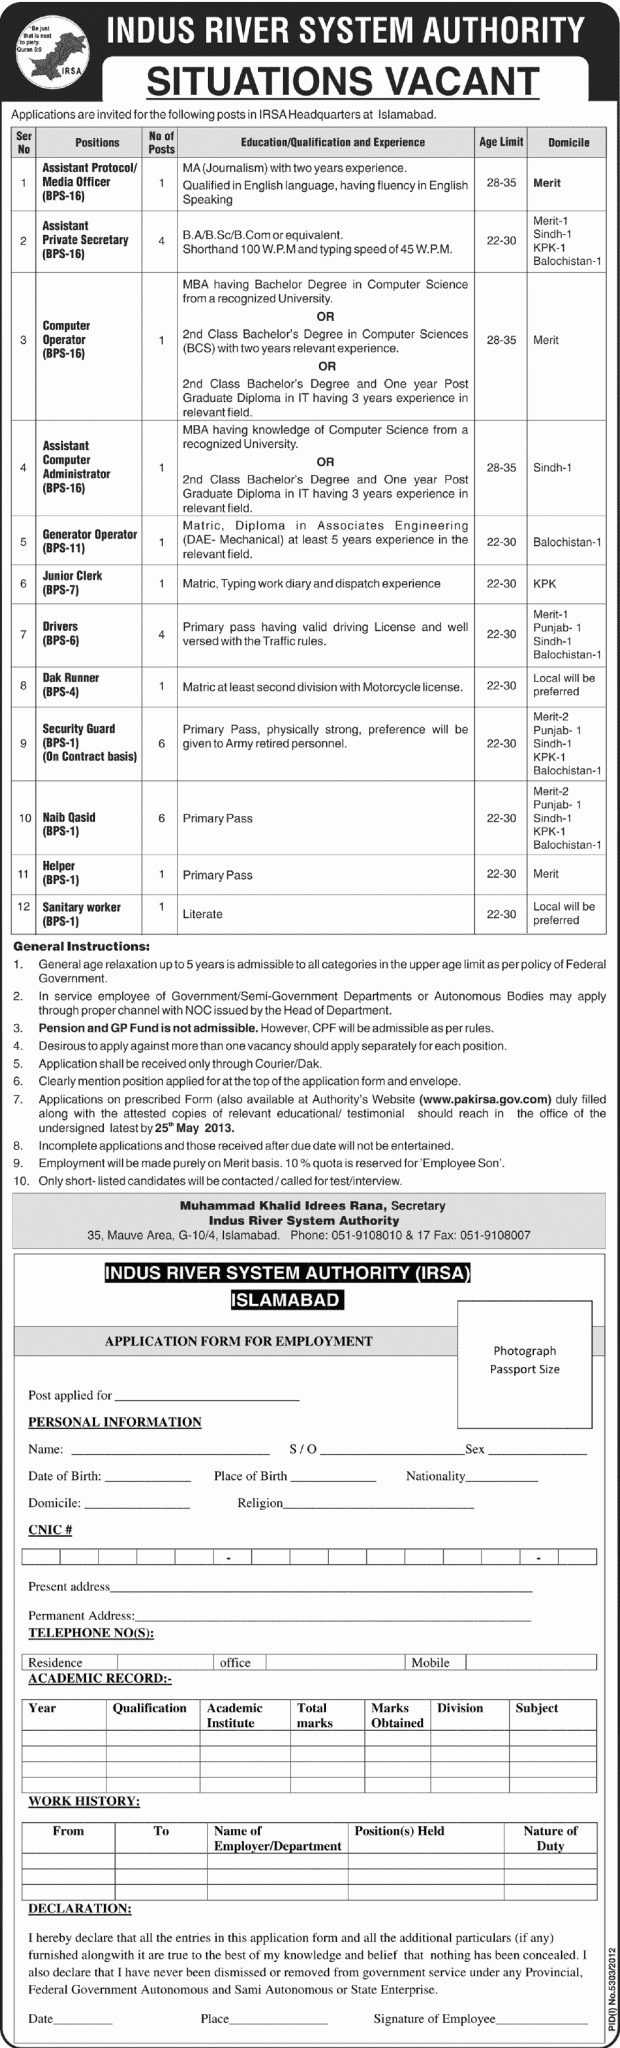 Jobs for Medical Officer, Secretary & Computer Operator in IRSA, Islamabad